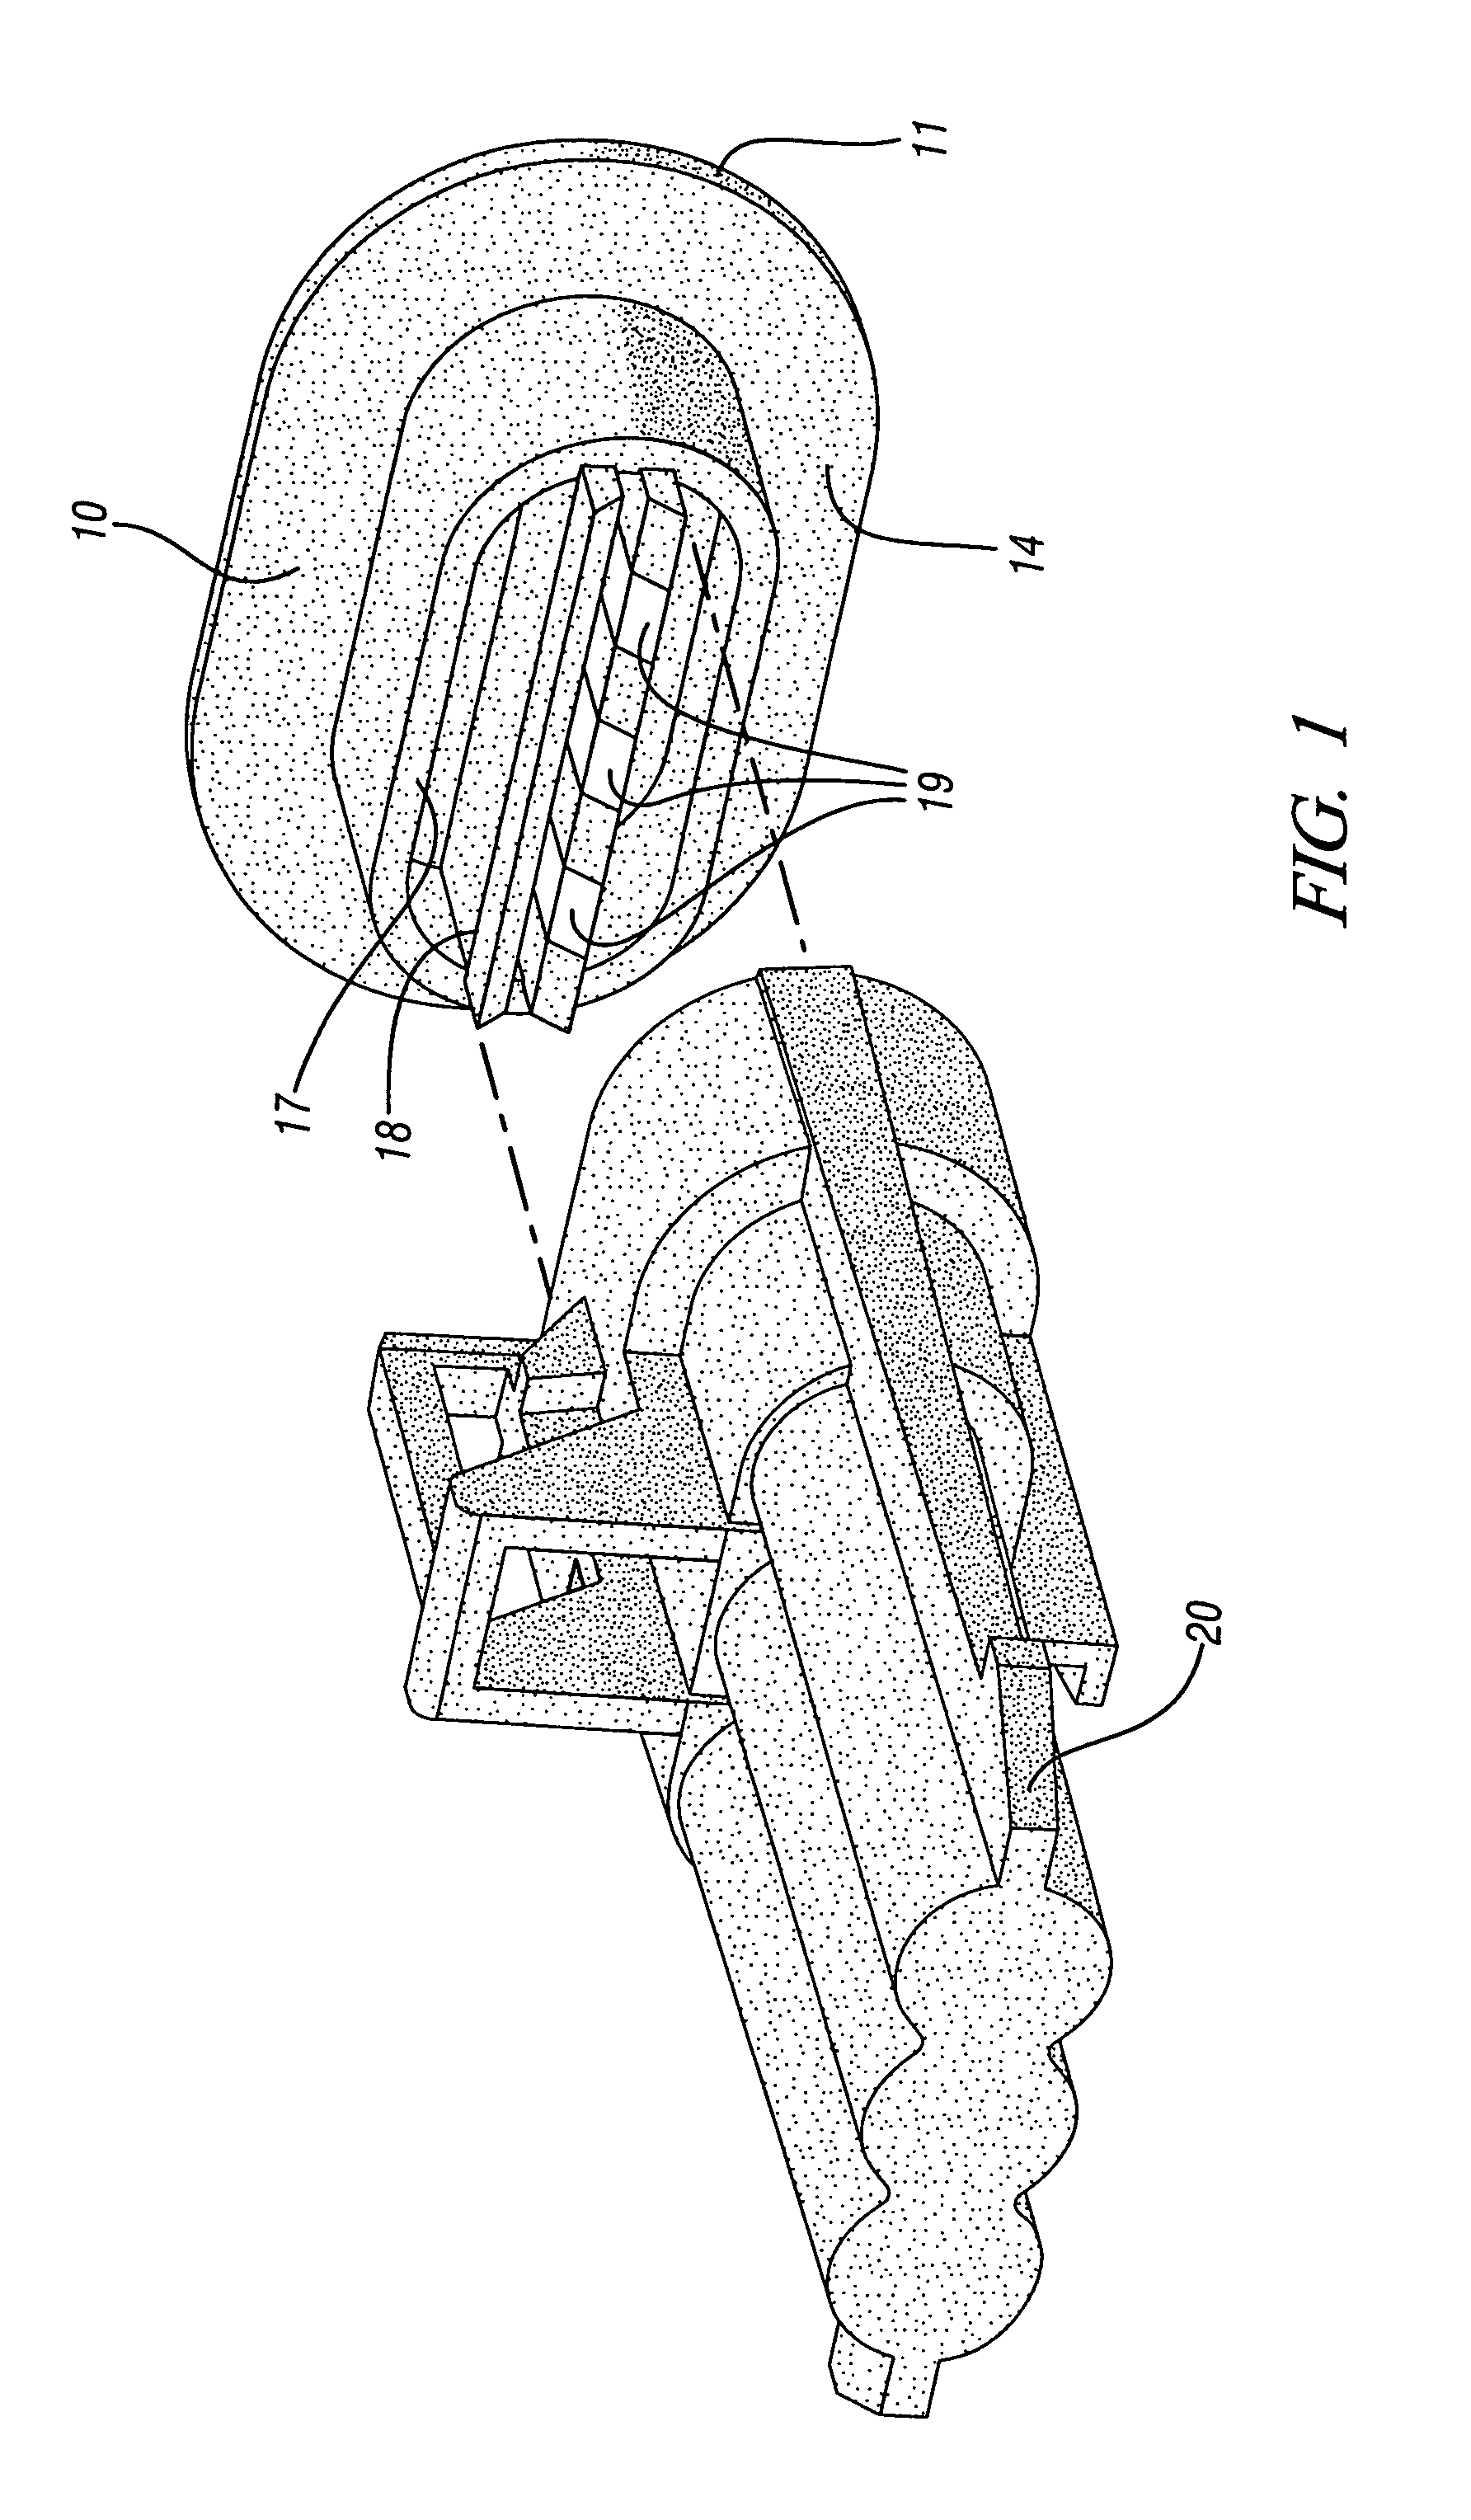 Cover device and method for electrical connector